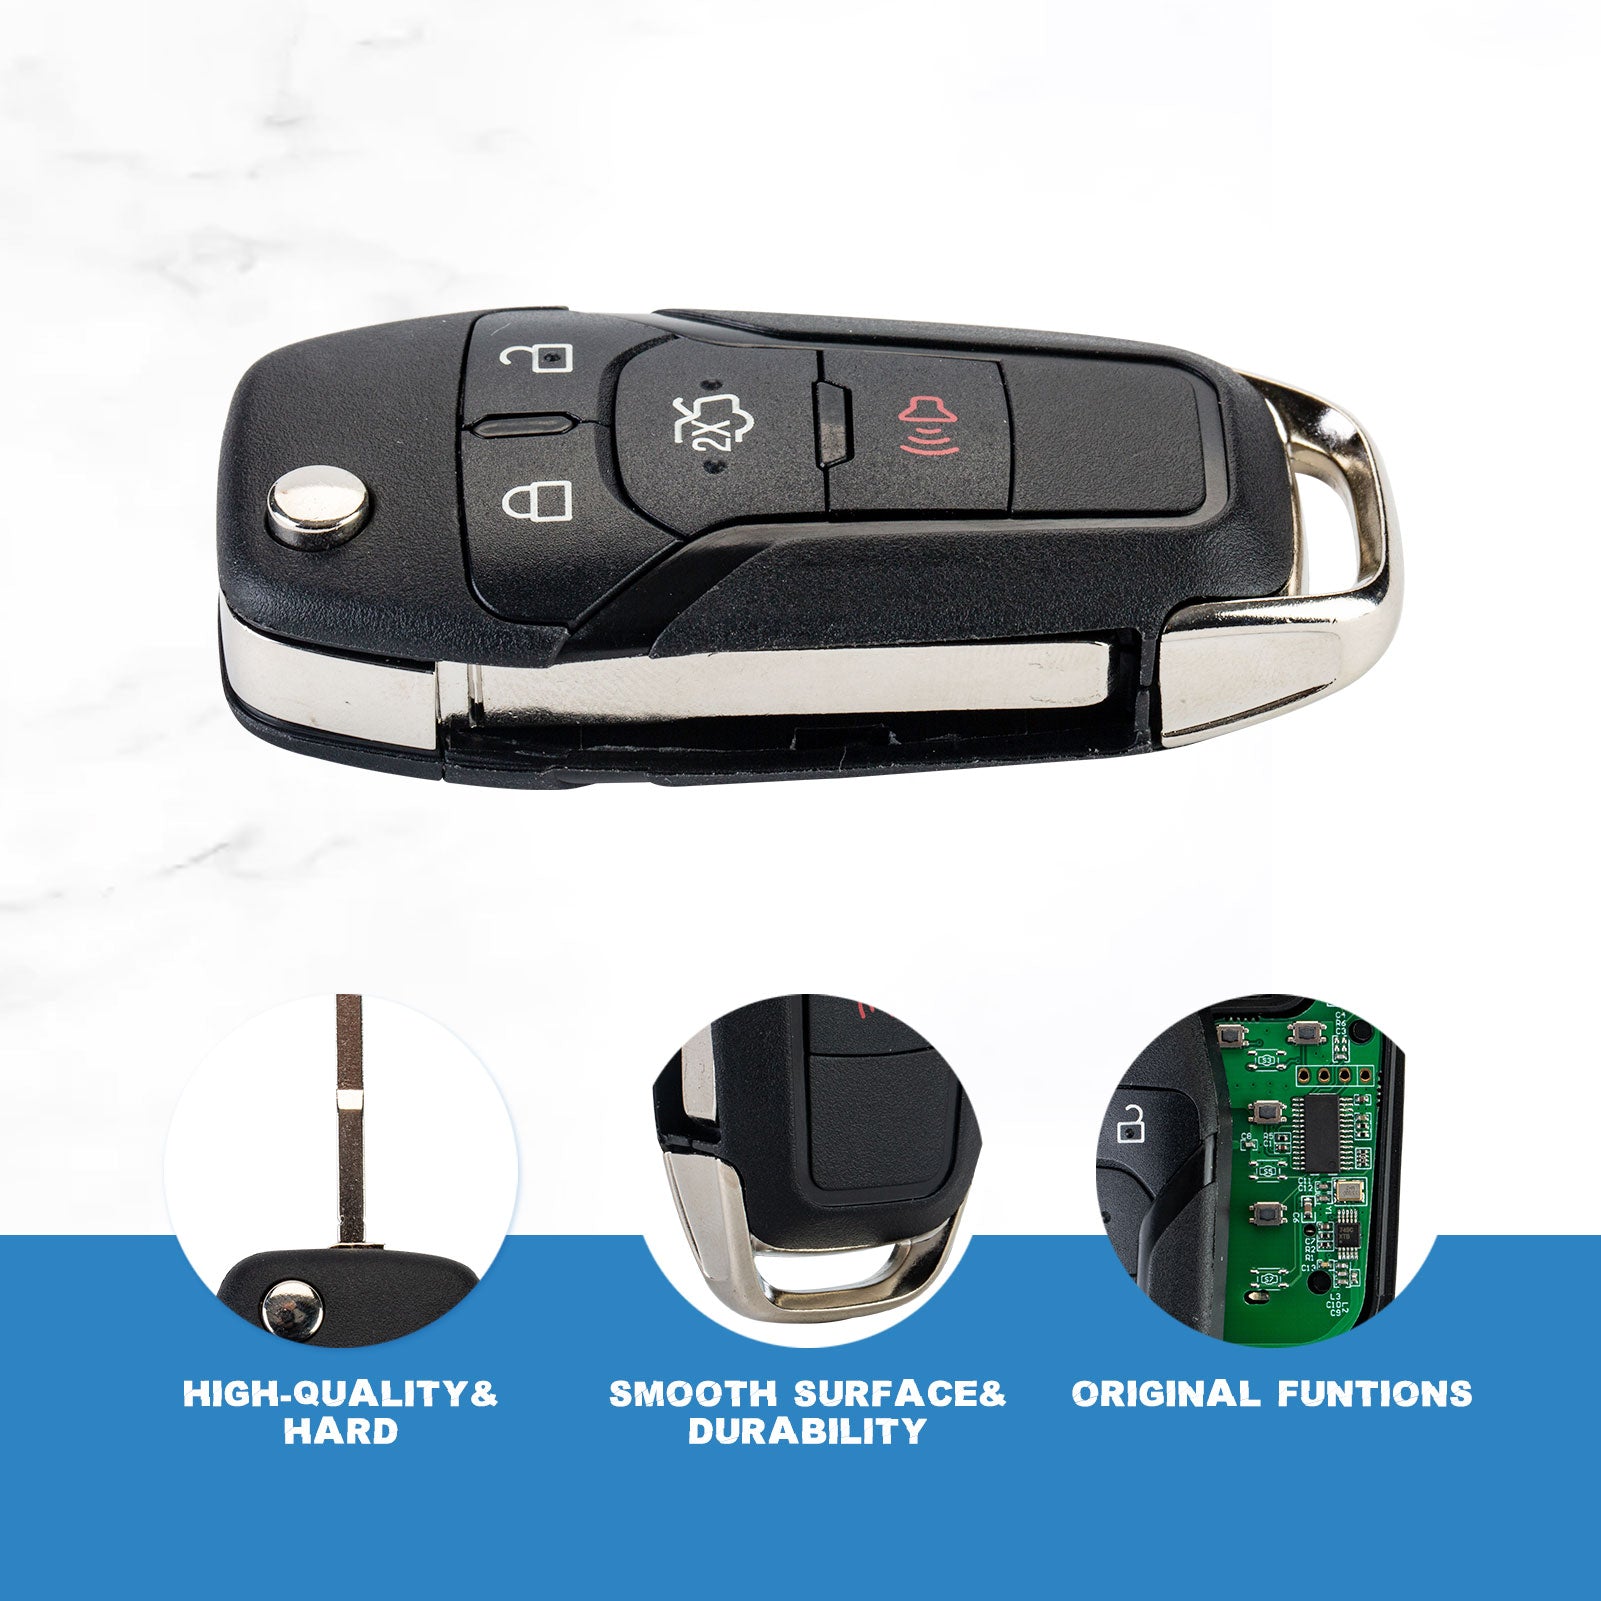 Flip Remote Keyless Entry Remote Fob Replacement for 2013-2016 Fusion N5F-A08TAA 315Mhz  KR-F4SE